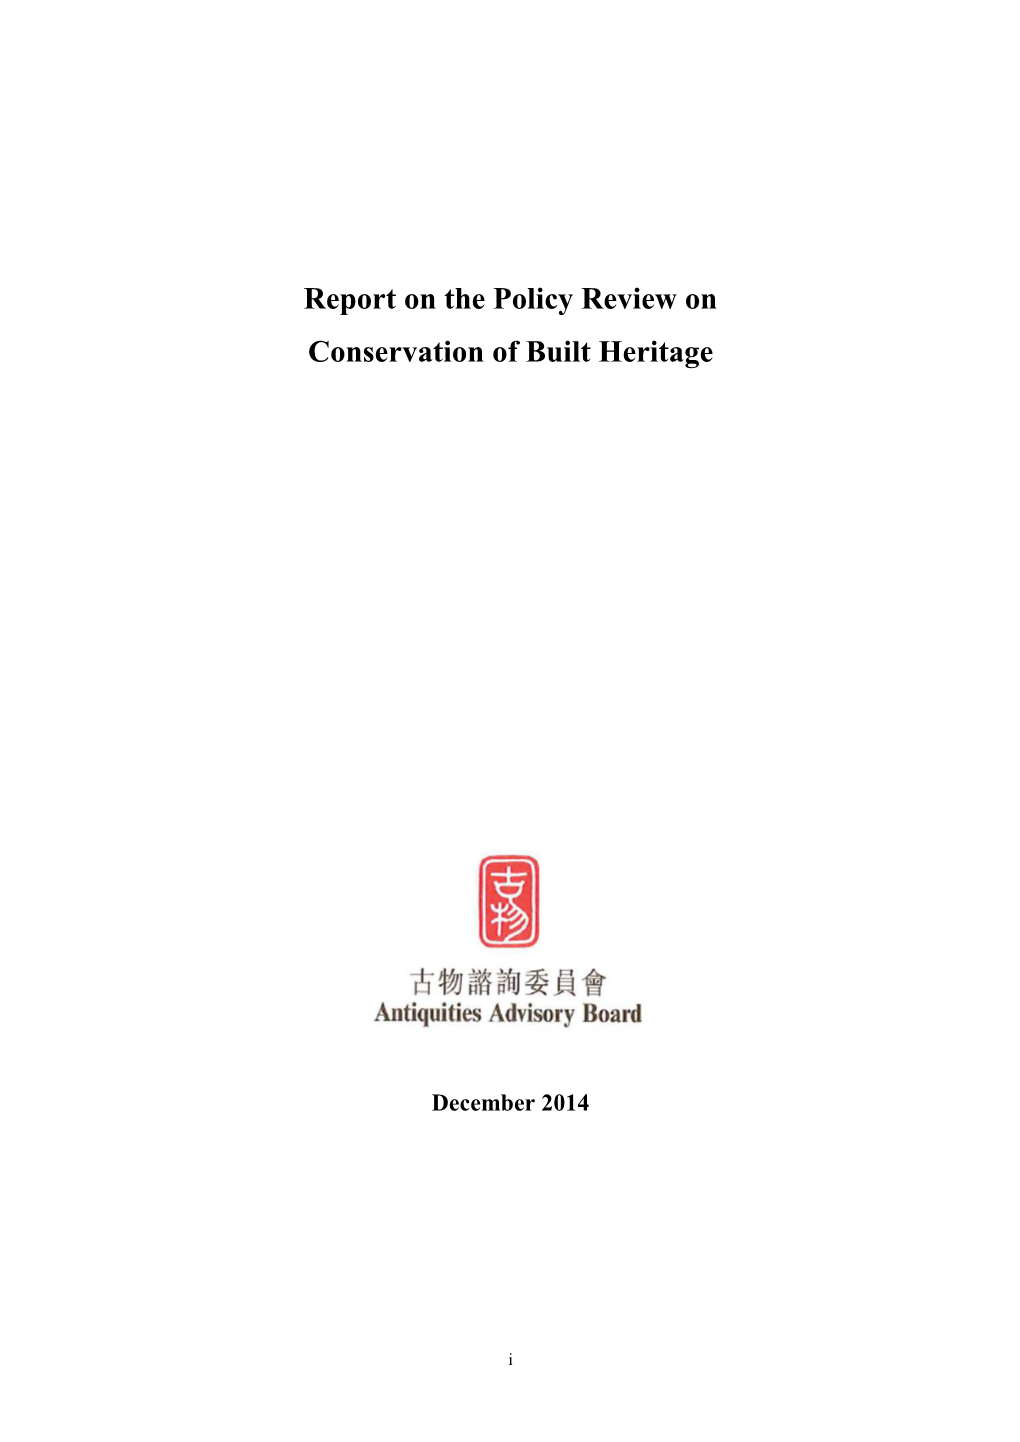 Report on the Policy Review on Conservation of Built Heritage